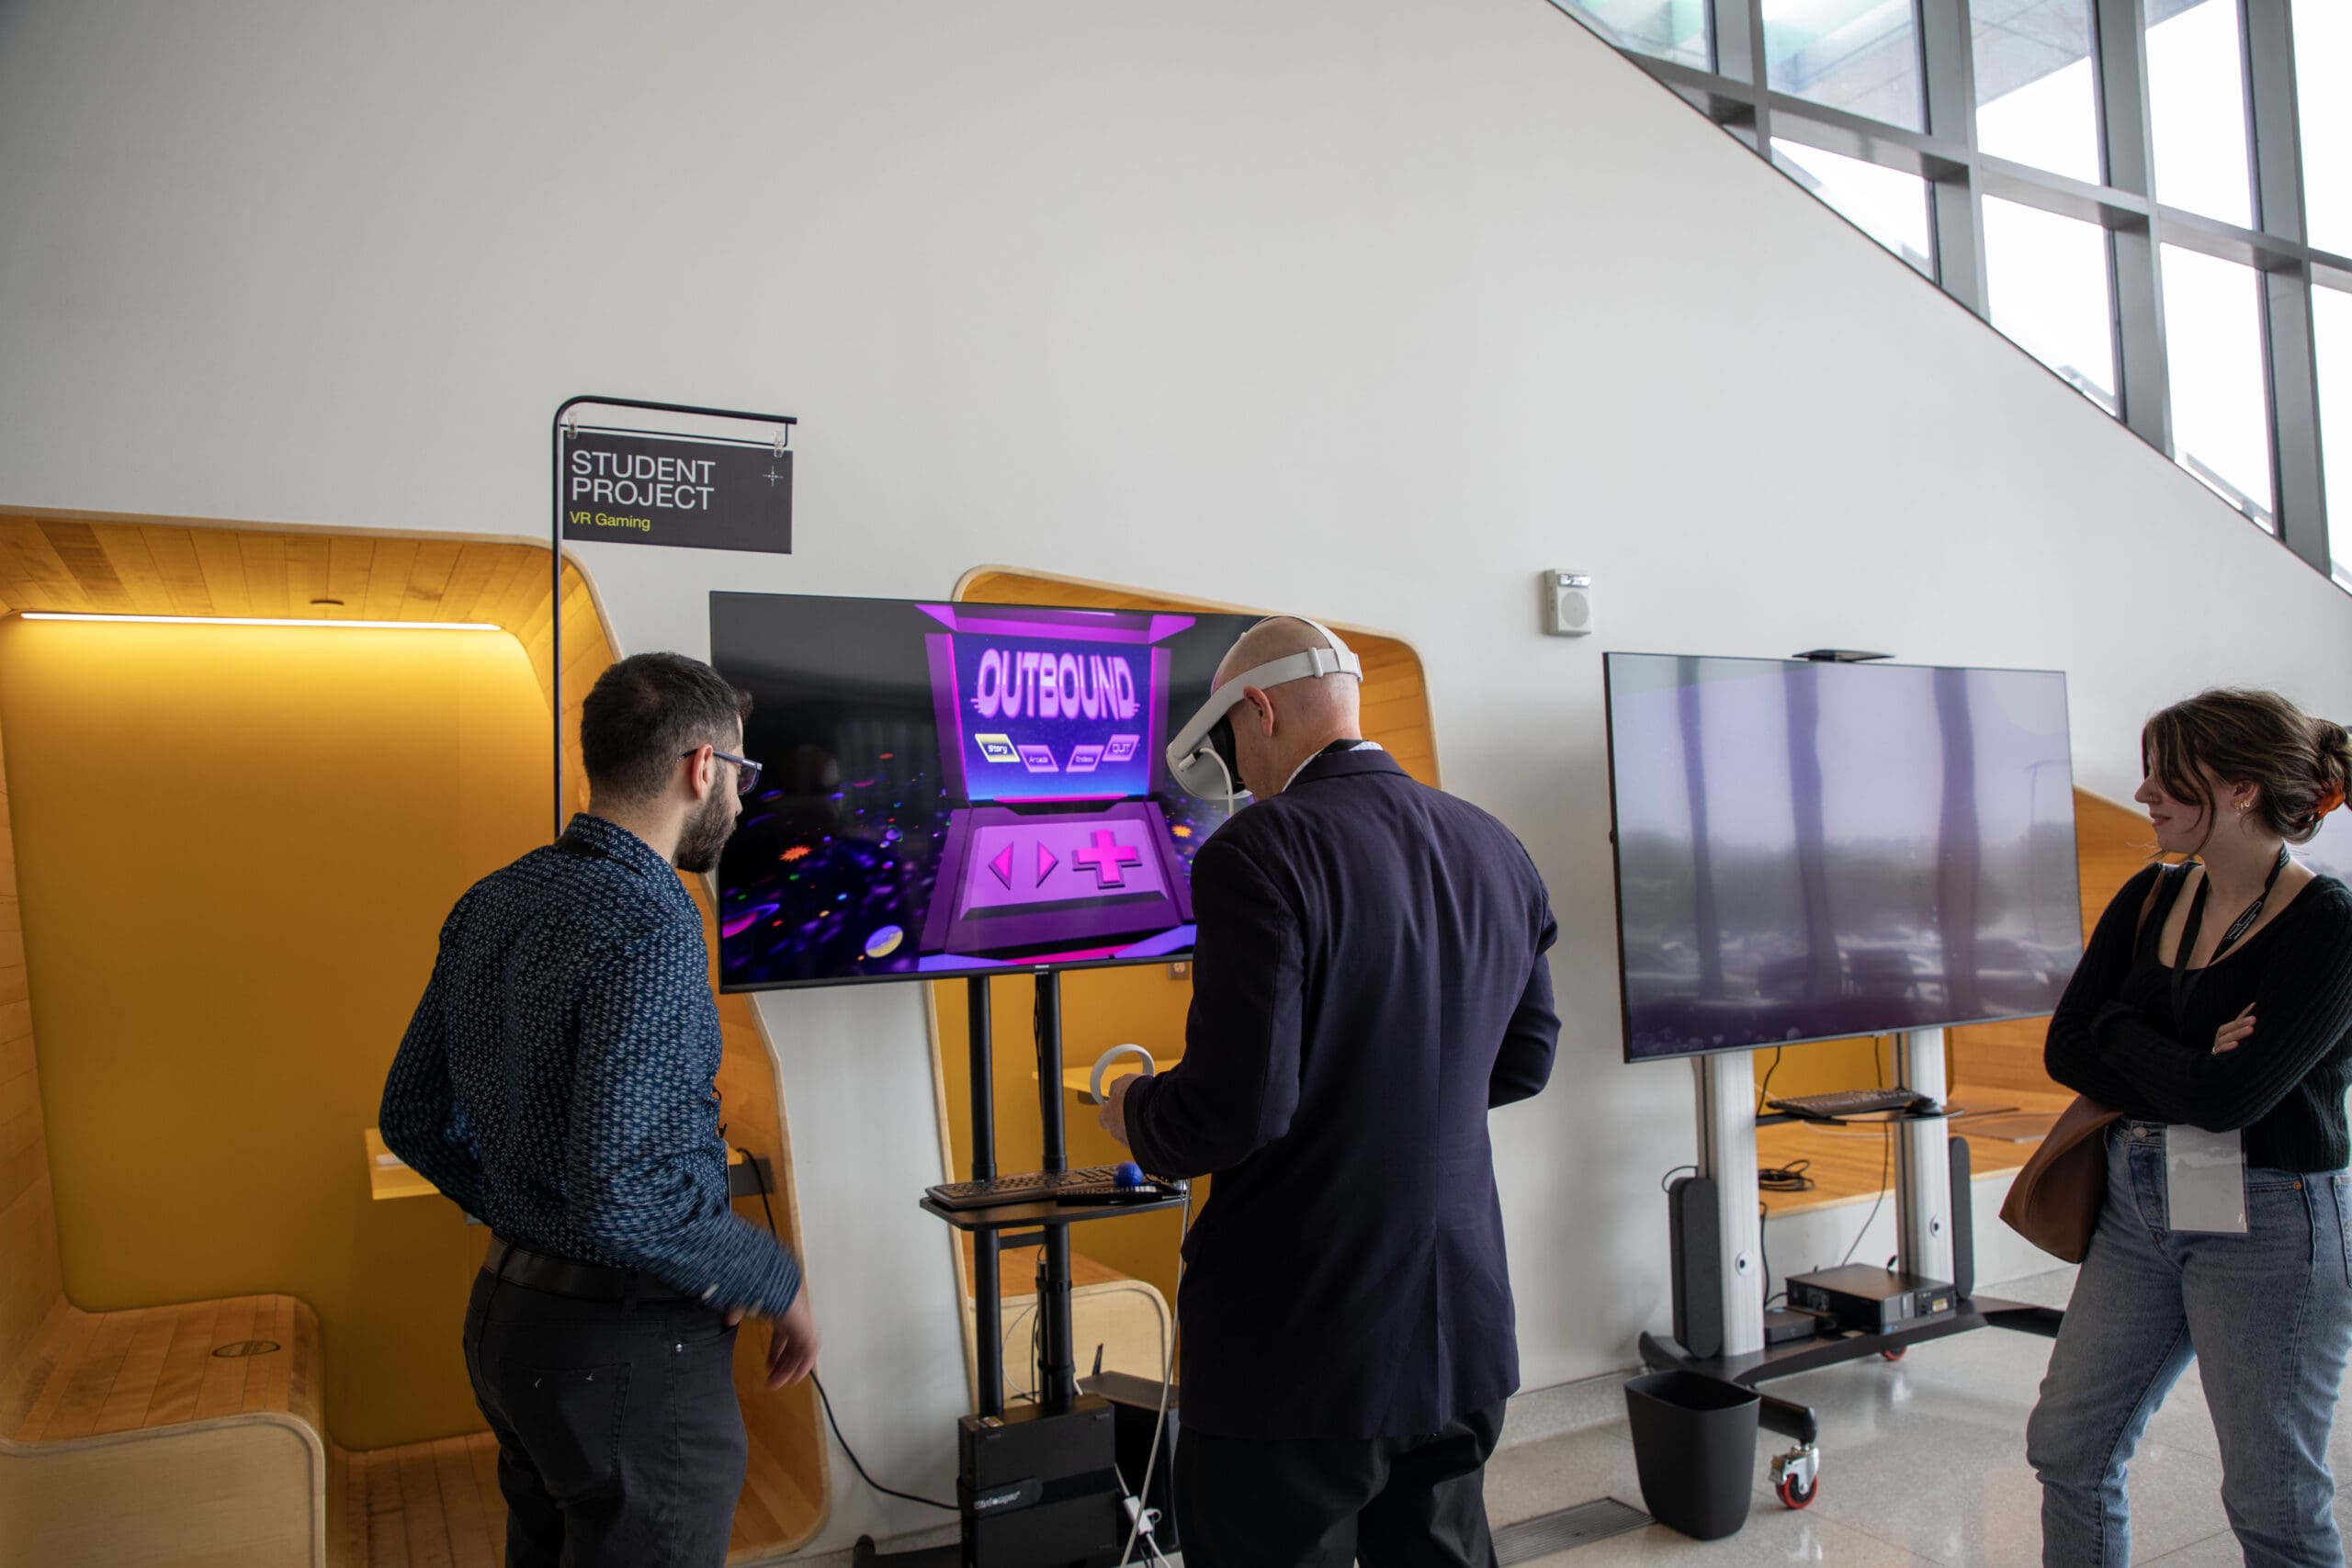 Visitors testing the outbound VR video game